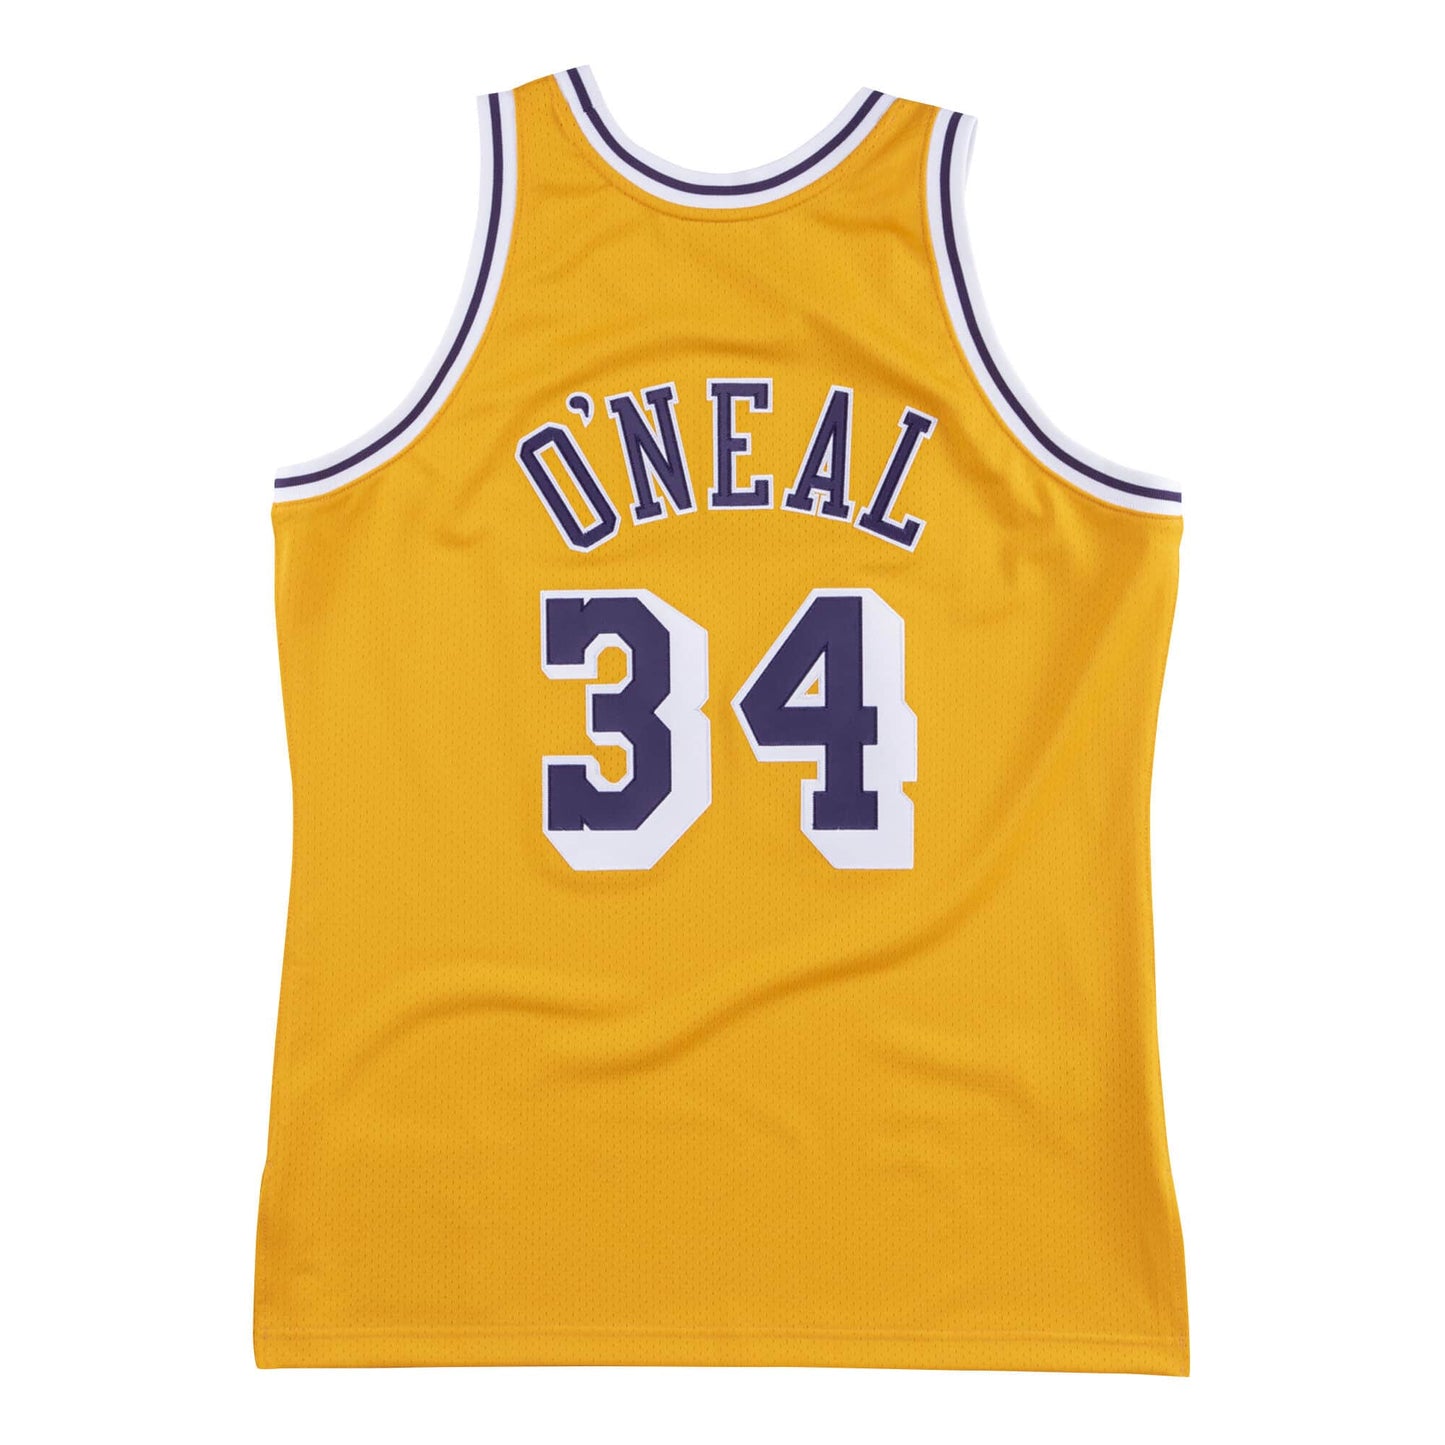 Authentic Jersey Los Angeles Lakers 1996-97 Shaquille O'Neal